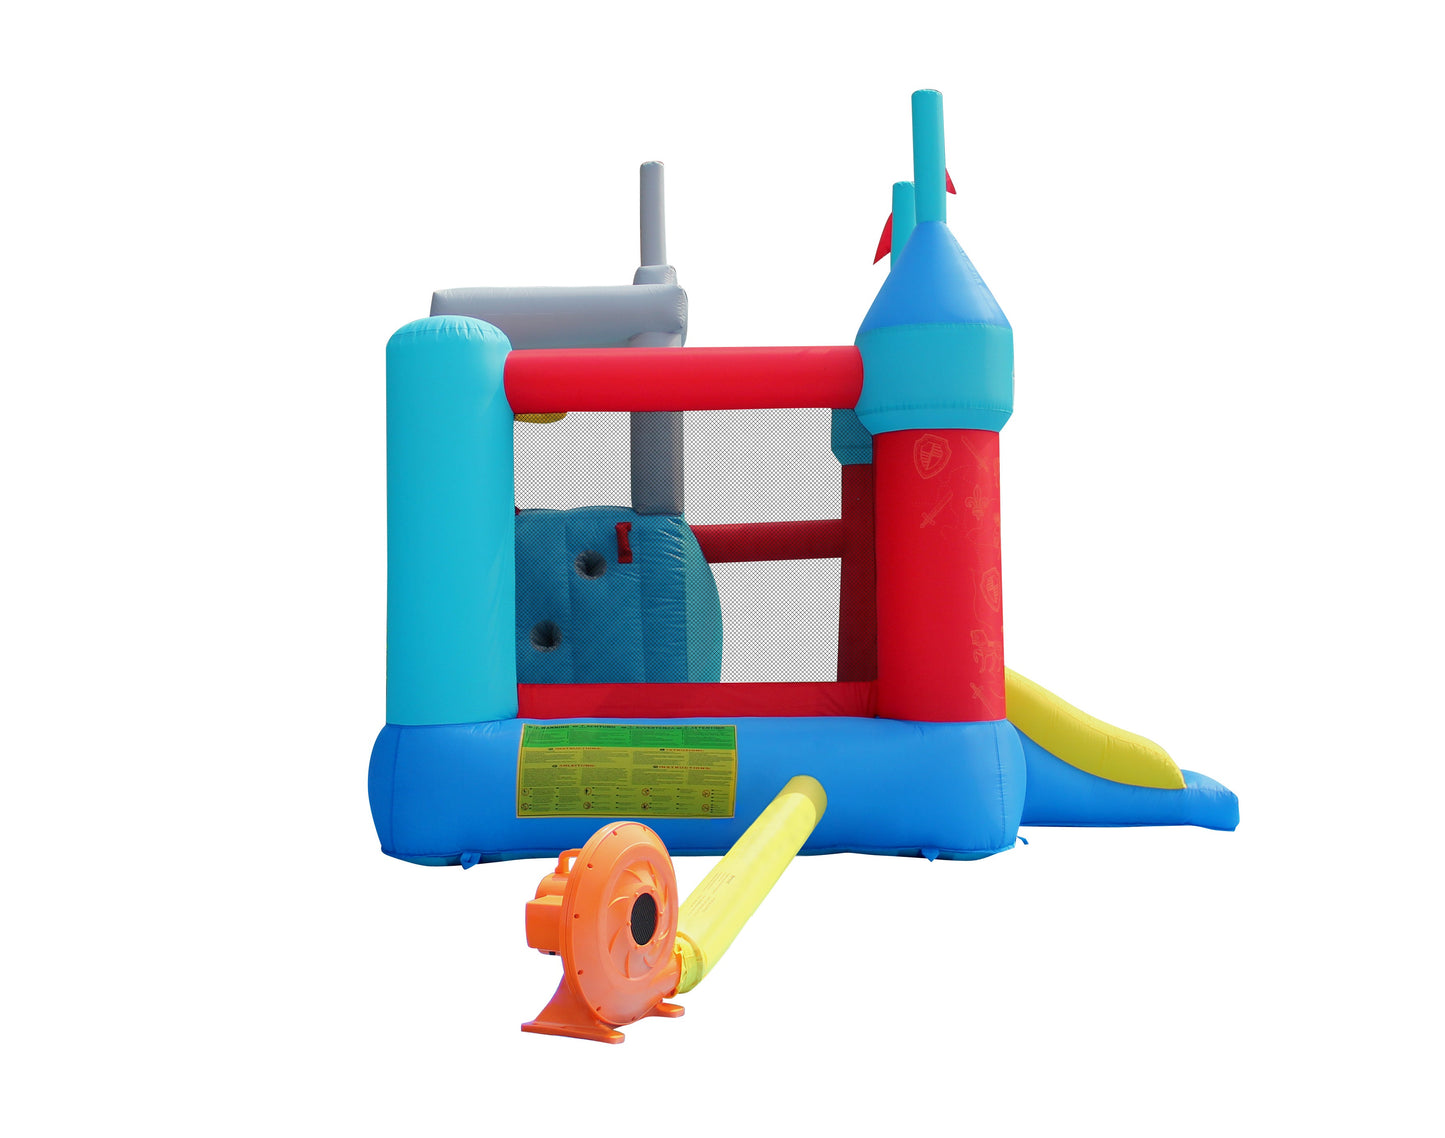 Knights Bouncer Activity Play Centre